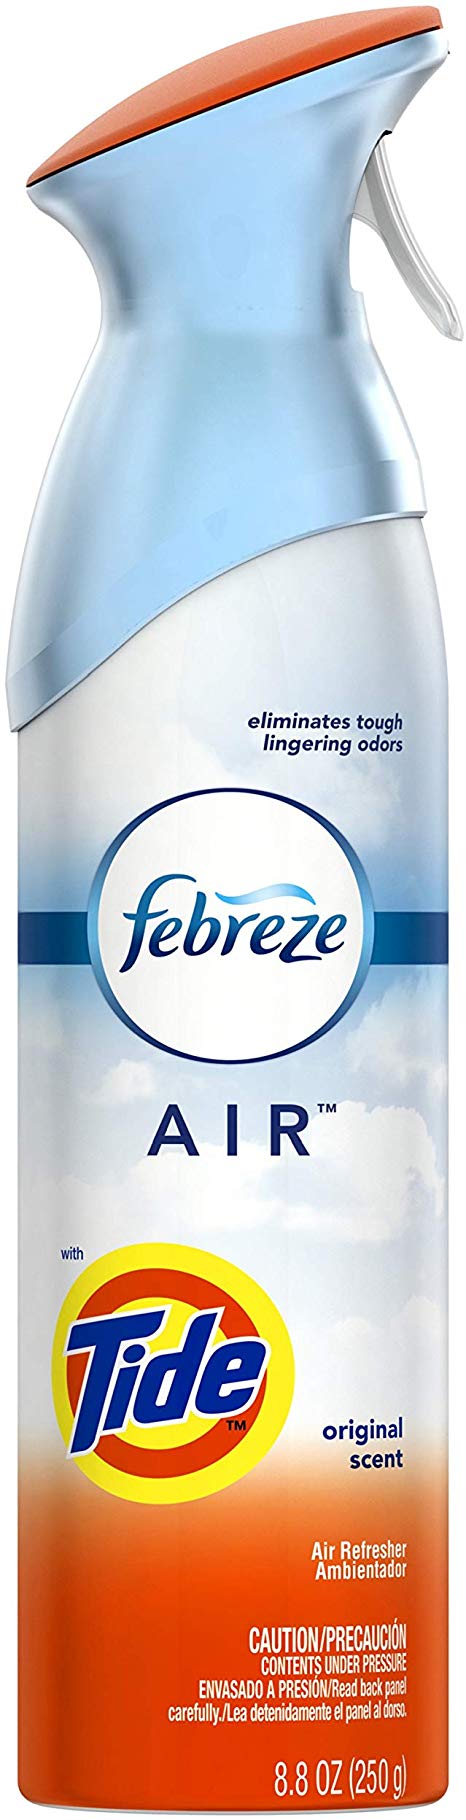 Febreze AIR Effects Air Freshener with Tide Original Scent (1 Count, 8.8 oz)